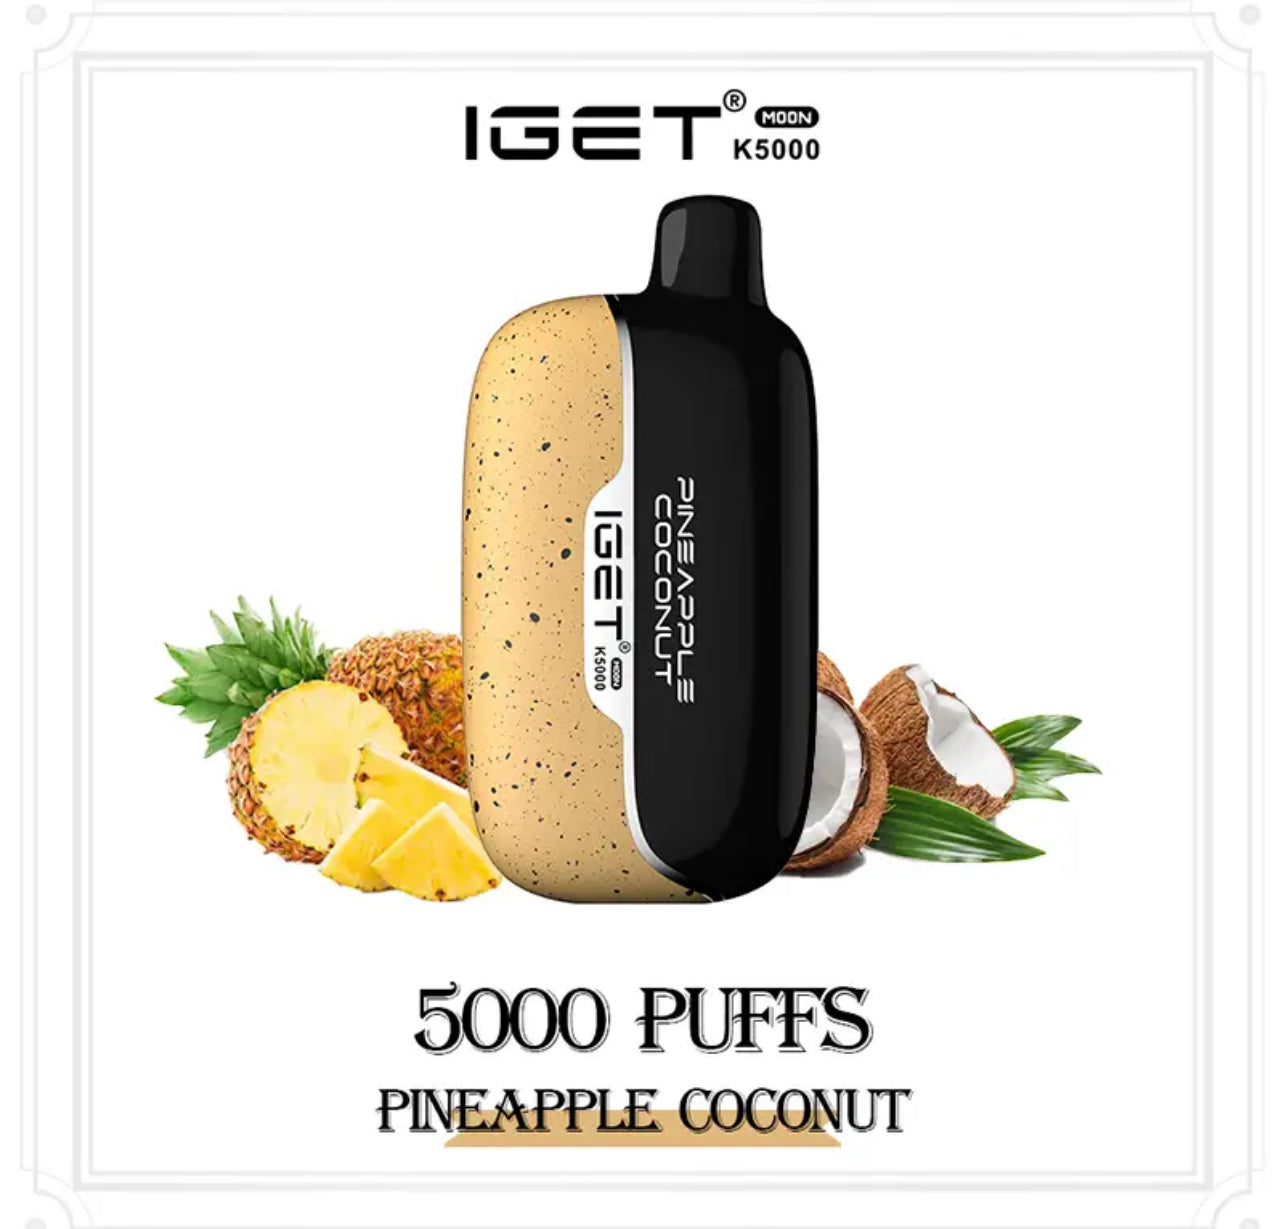 IGET MOON PINEAPPLE COCONUT 5000 PUFFS